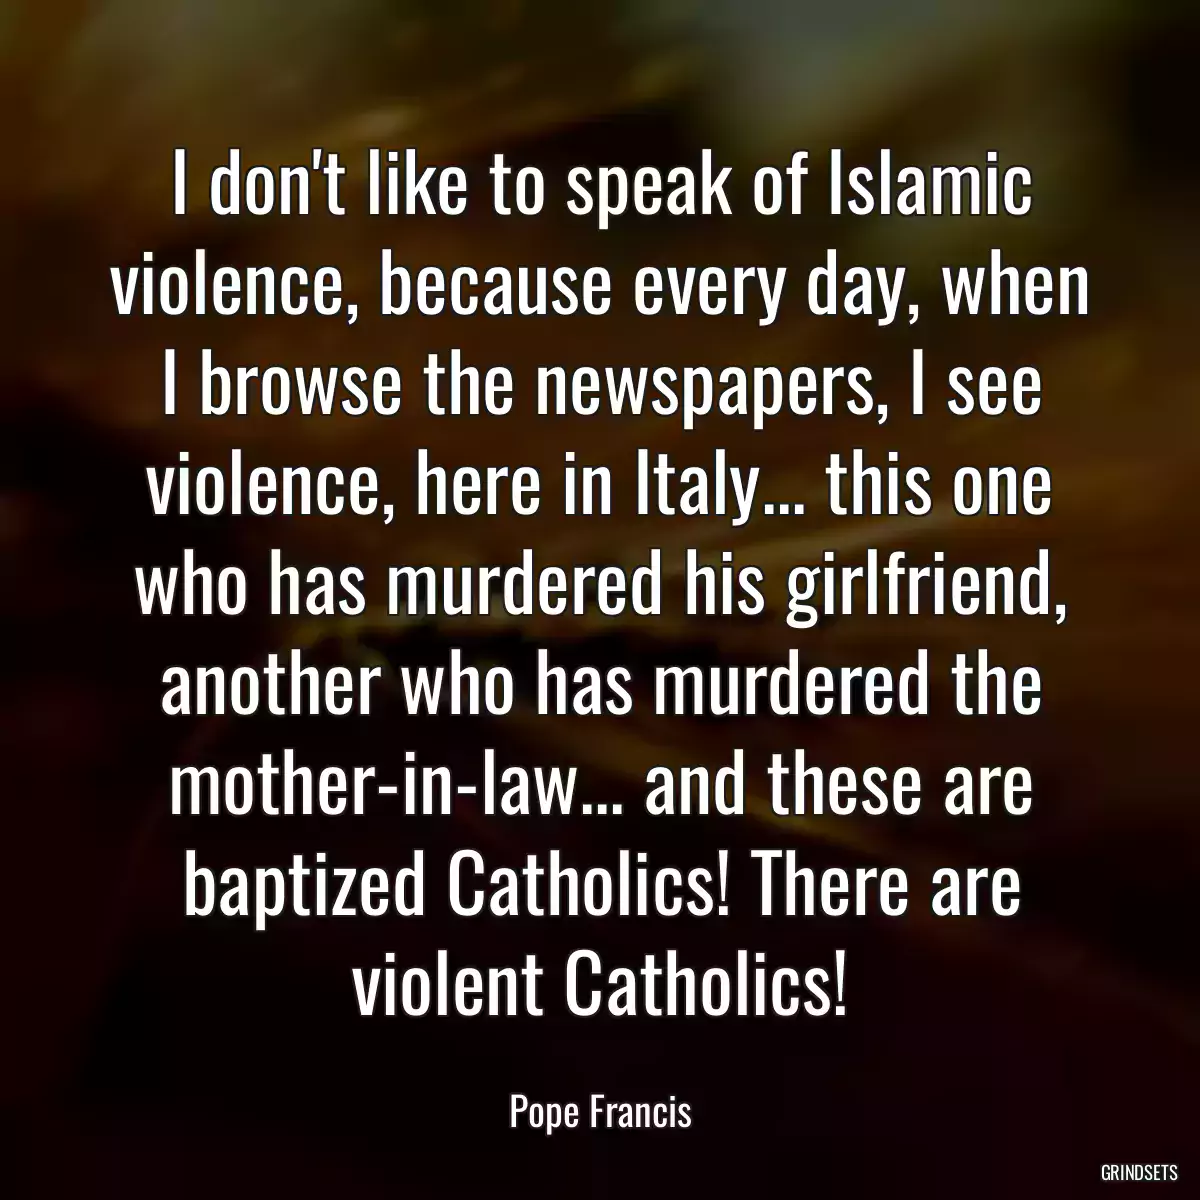 I don\'t like to speak of Islamic violence, because every day, when I browse the newspapers, I see violence, here in Italy... this one who has murdered his girlfriend, another who has murdered the mother-in-law... and these are baptized Catholics! There are violent Catholics!